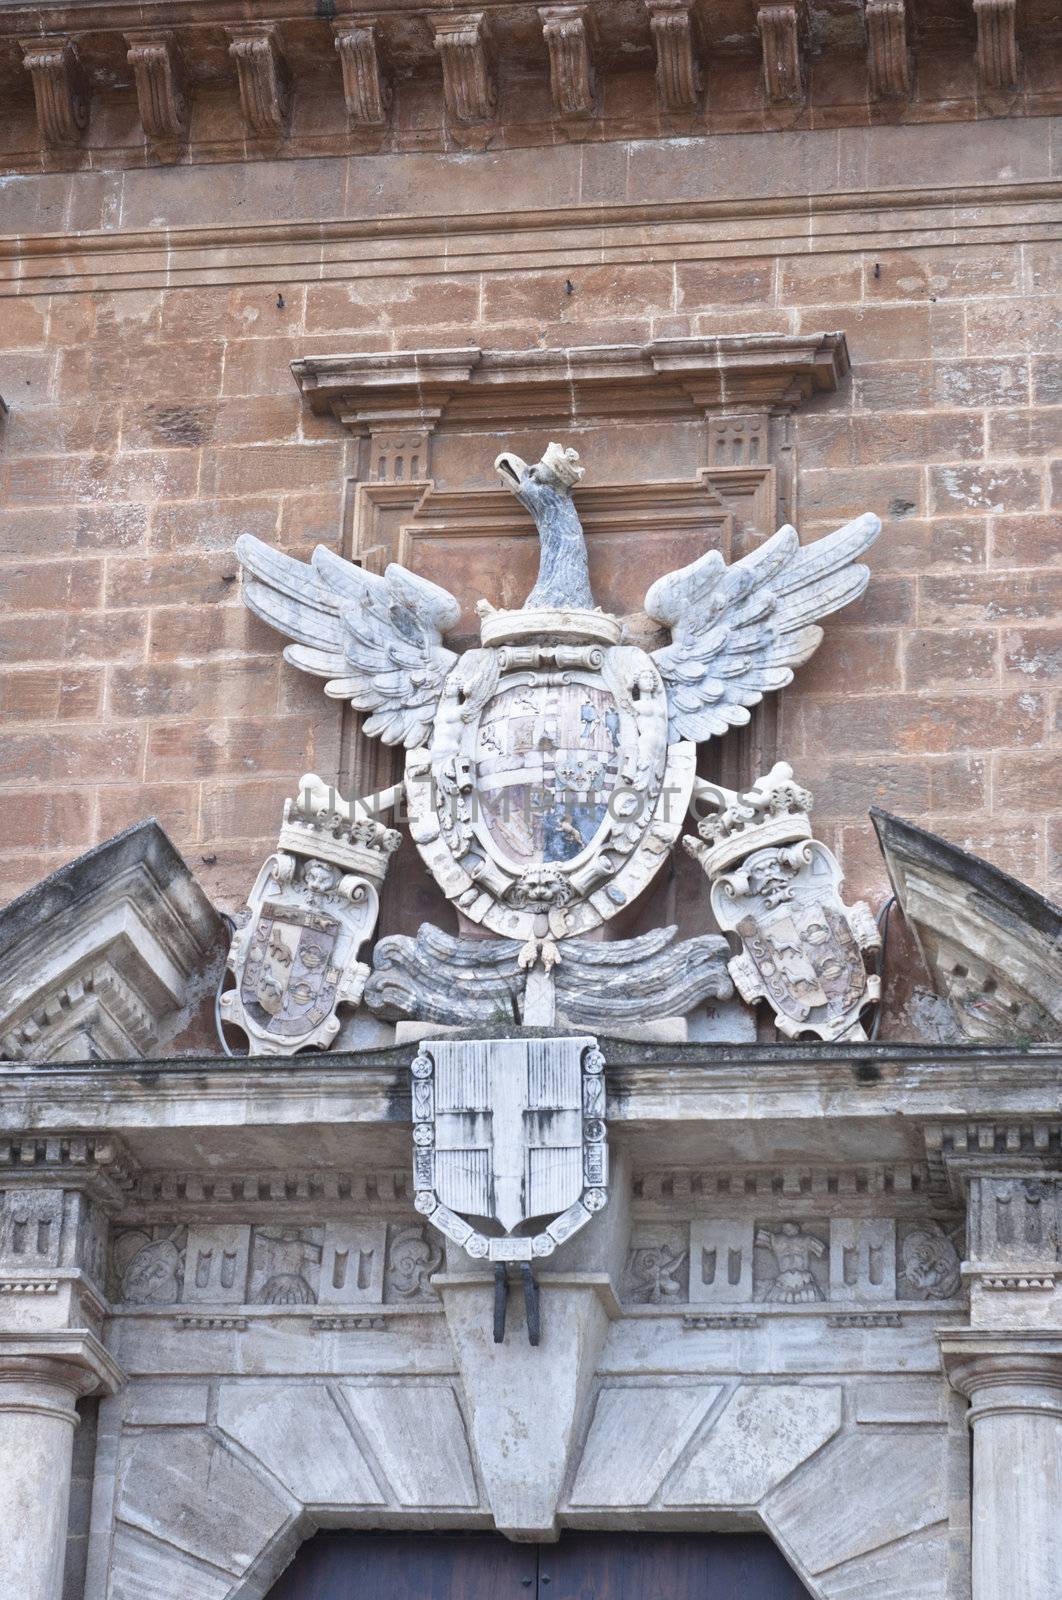 Palermo coat of arms. Sculpture located near the Normans' Royal Palace in Palermo, Sicily.